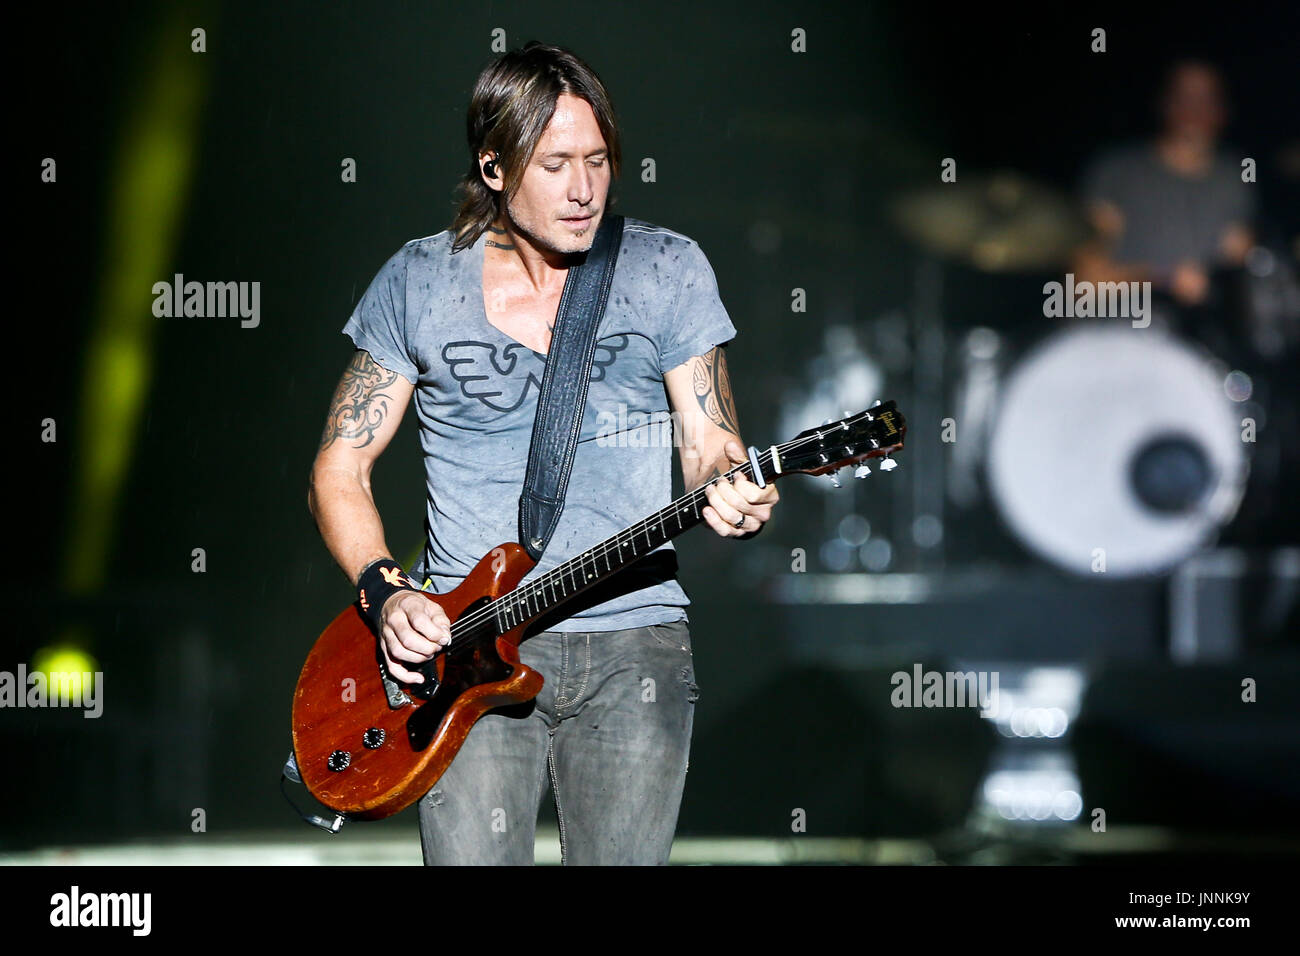 Keith Urban Performs at 2017 Country Thunder Music Festival on July 21, 2017 in Twin Lakes, Wisconsin Stock Photo